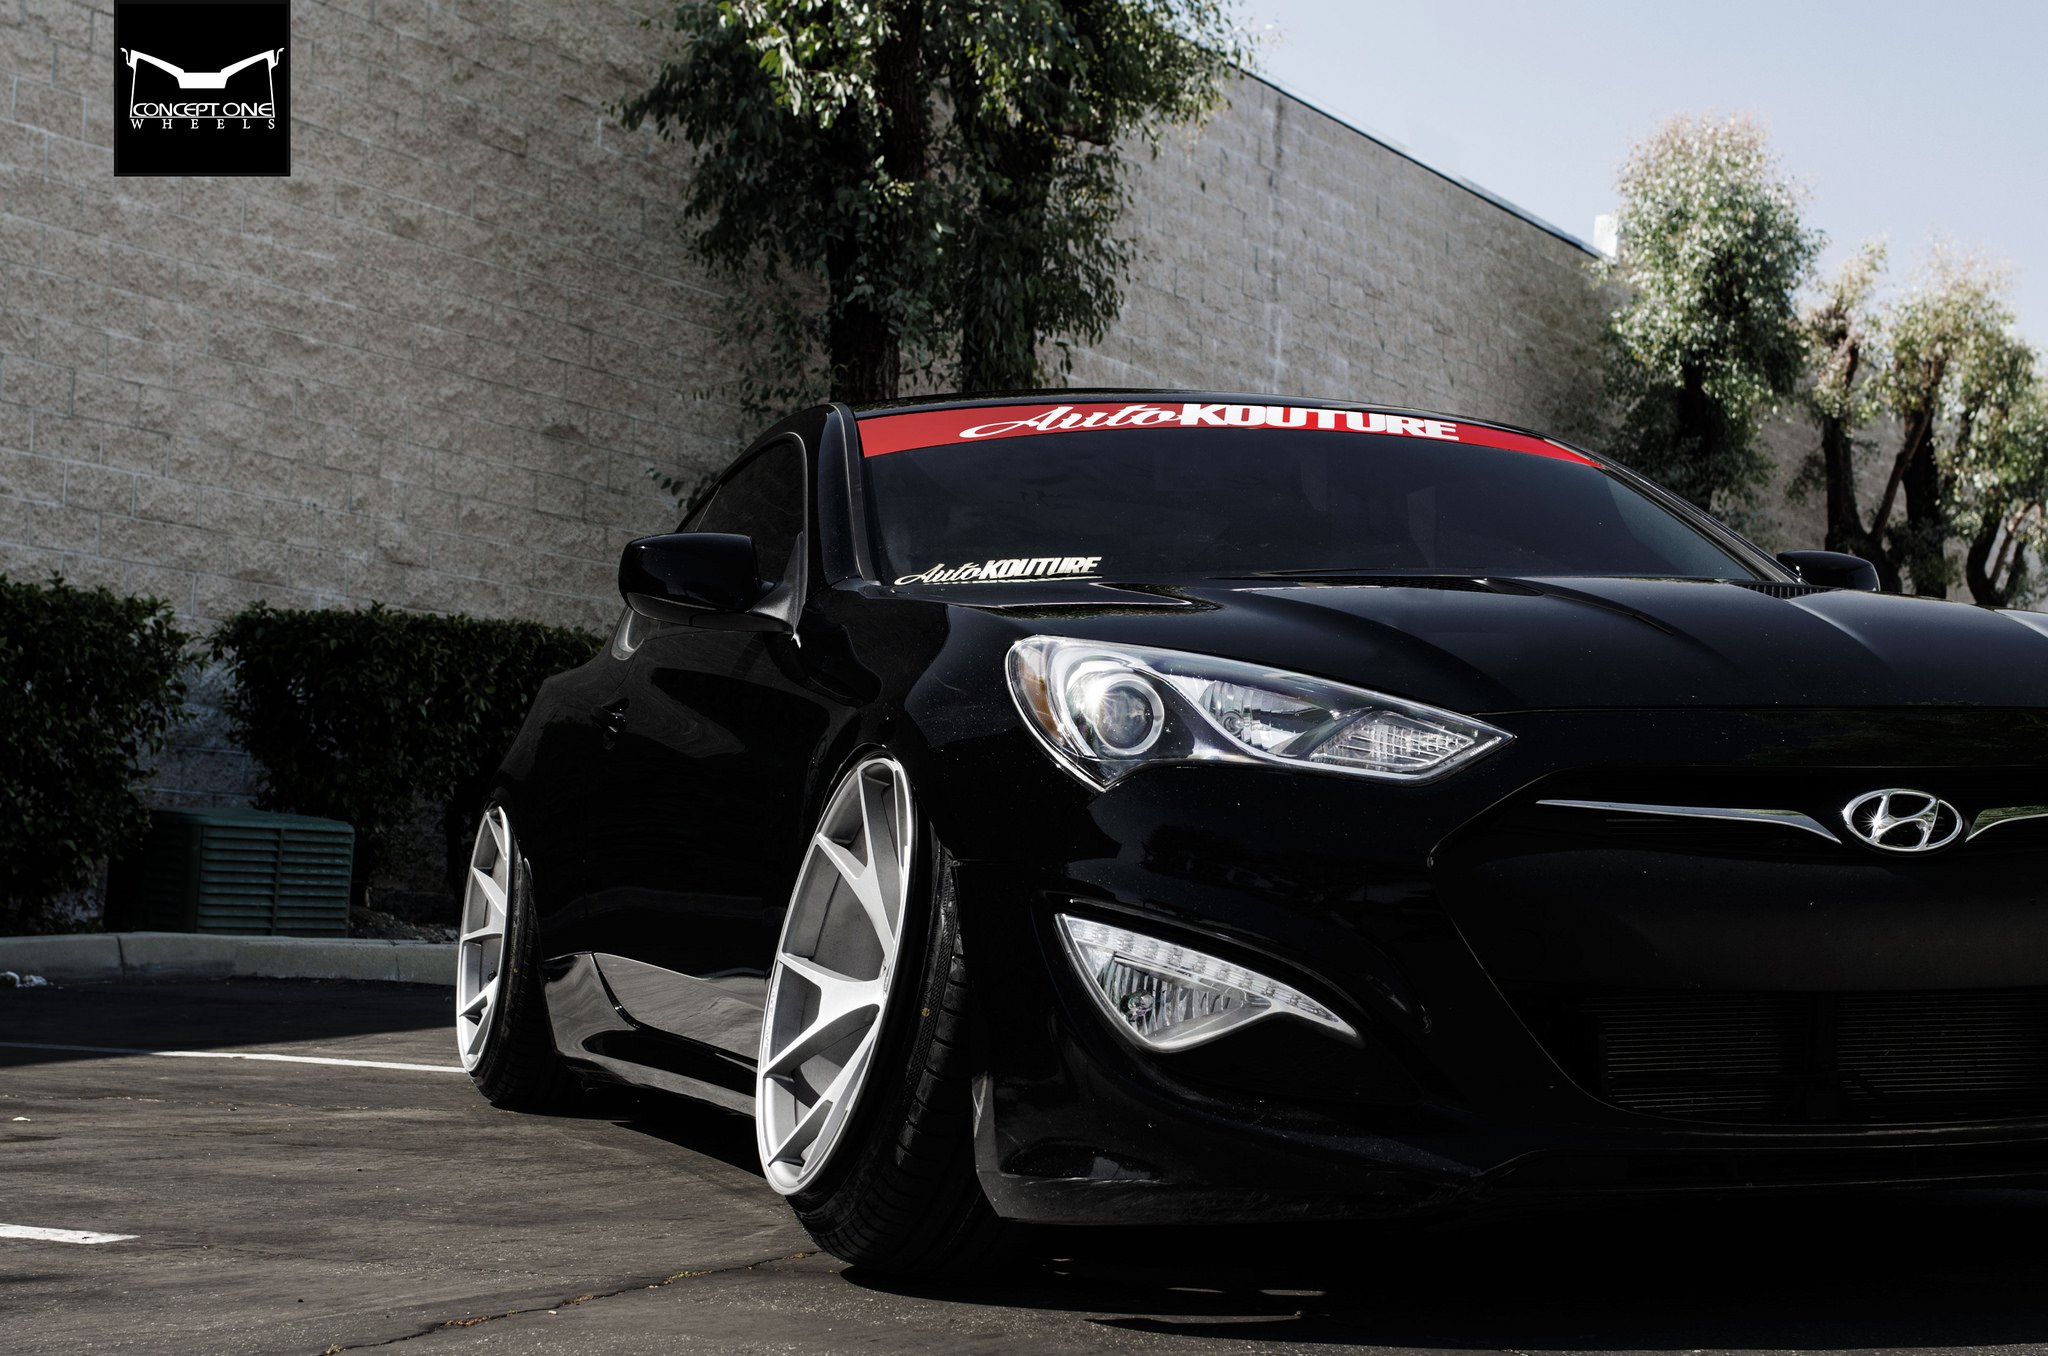 Chrome Concept One Rims on Black Hyundai Genesis Coupe - Photo by Concept One